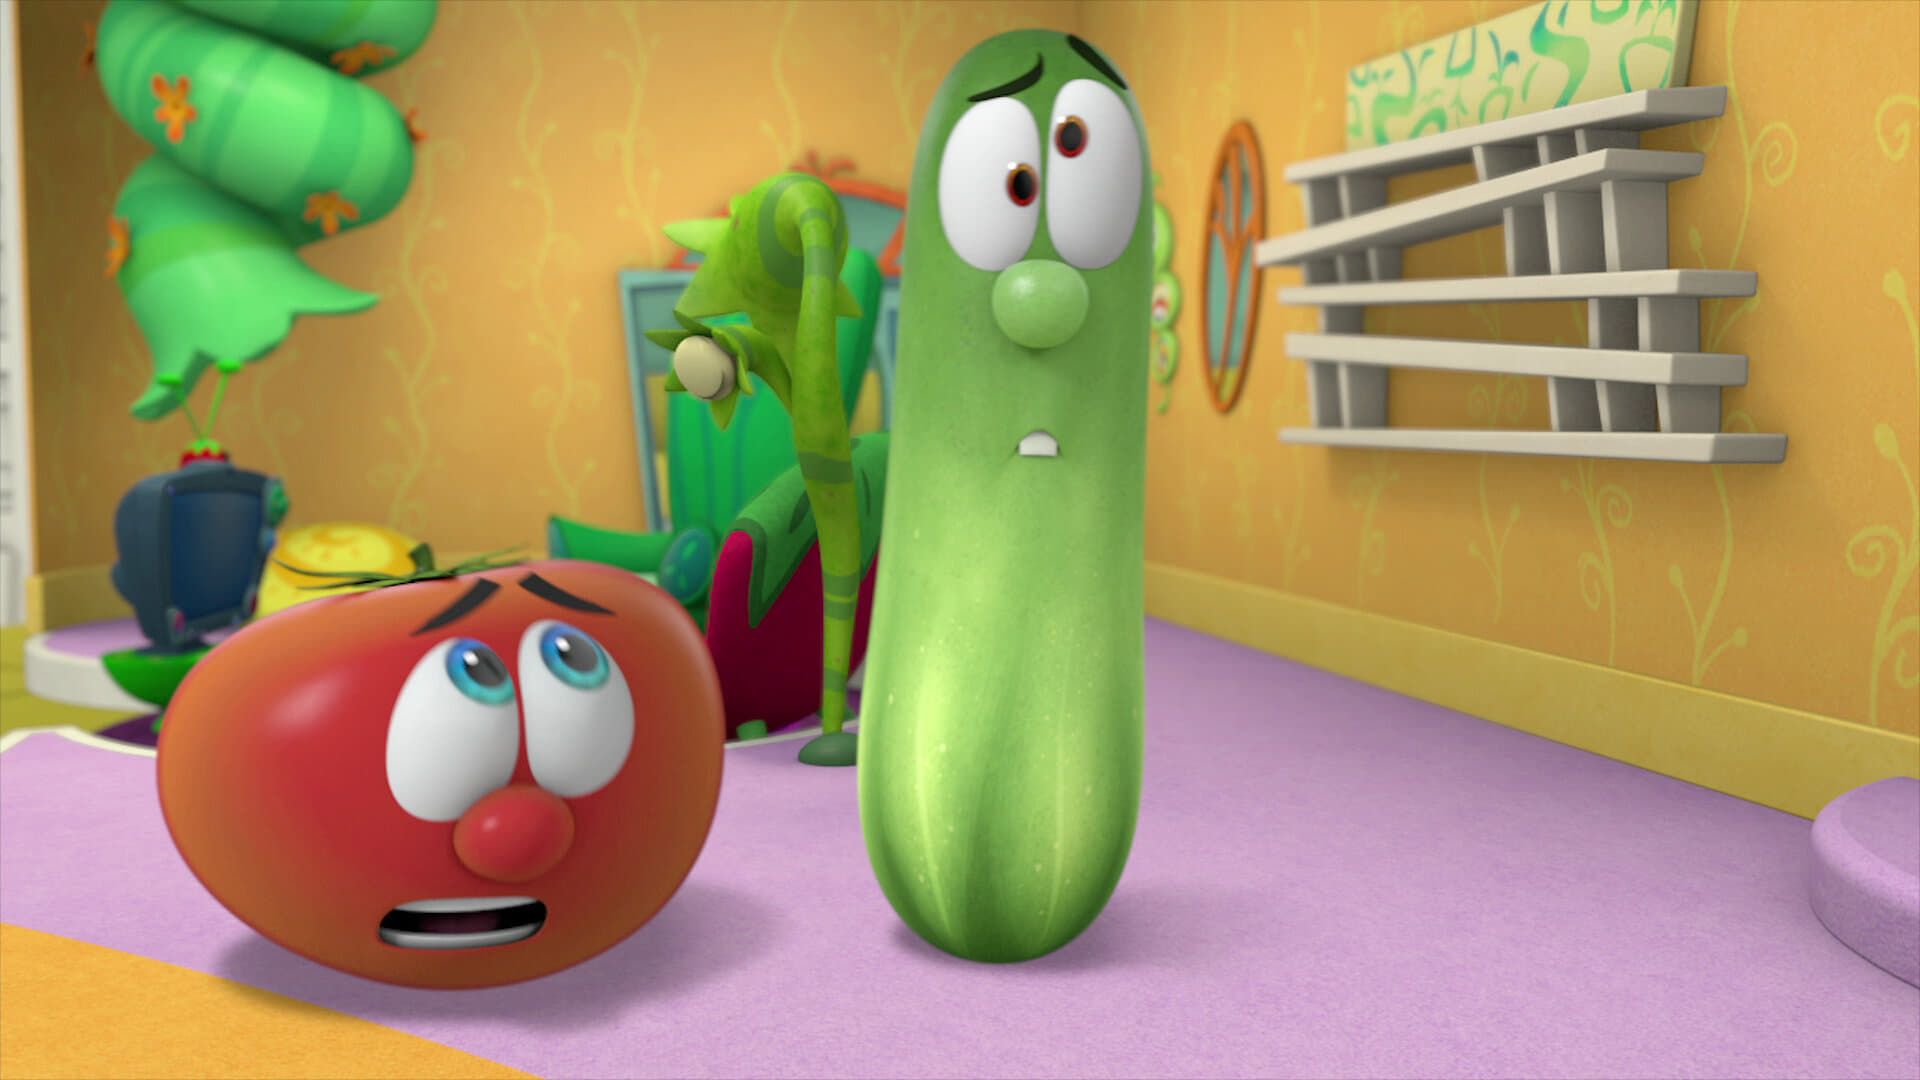 VeggieTales in the House background